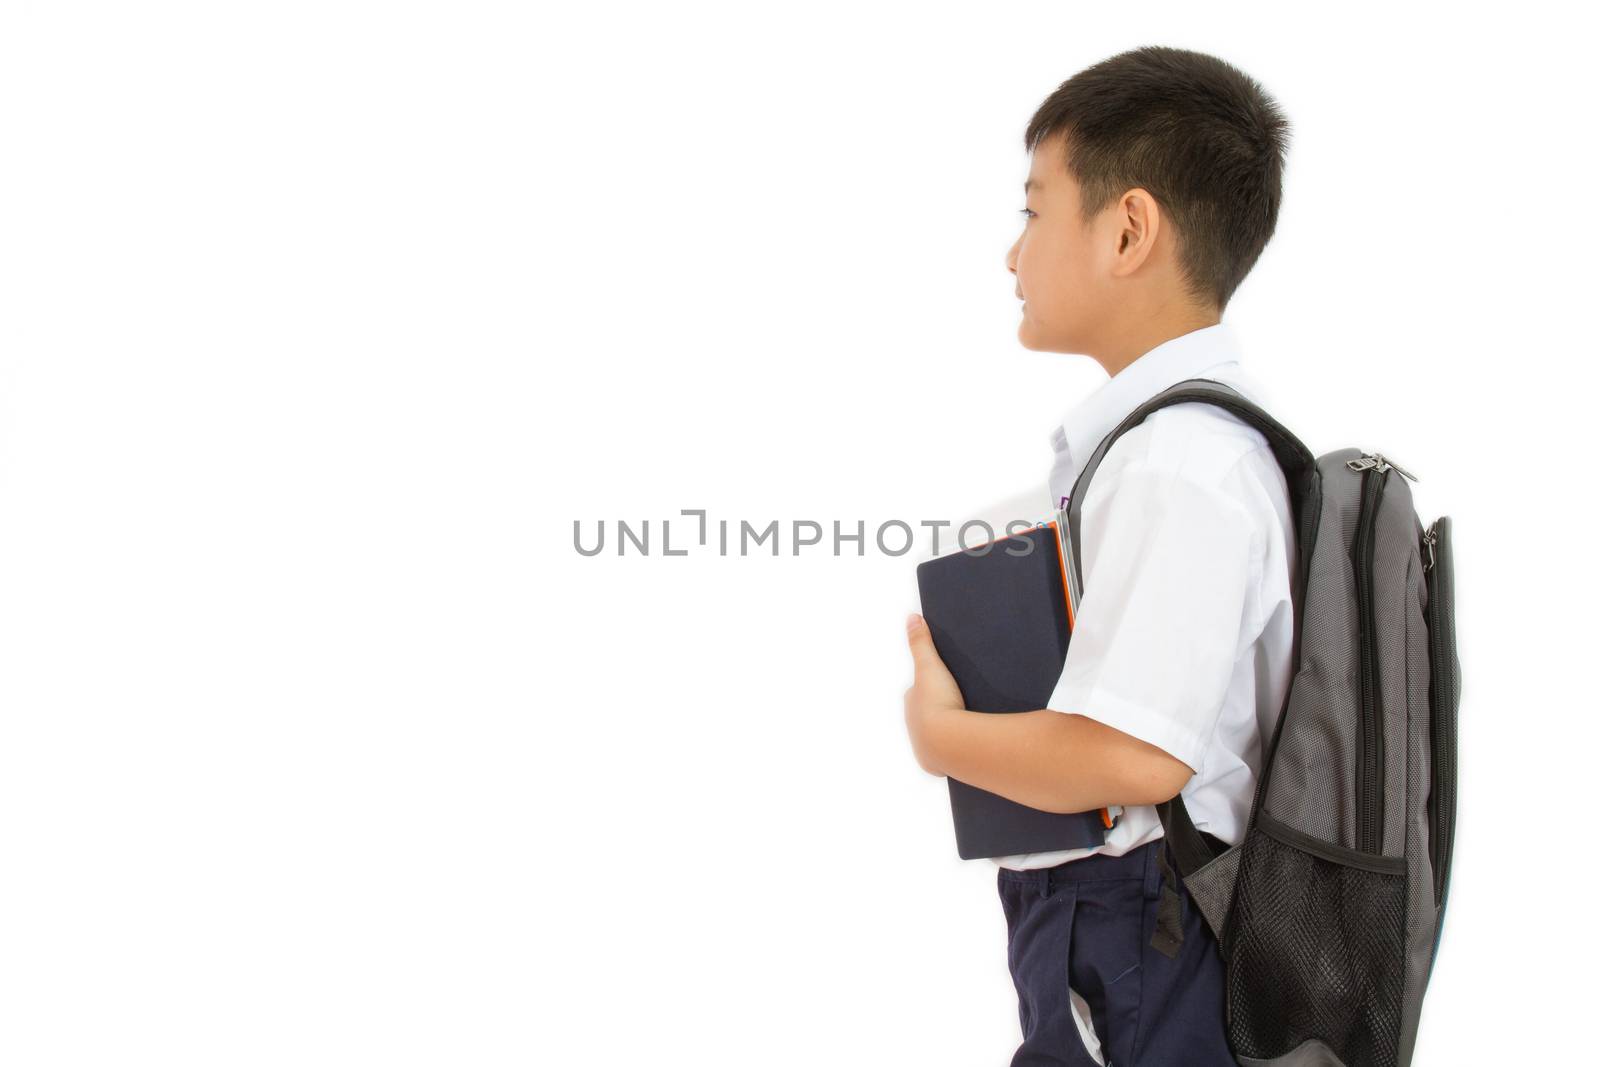 Asian Little School Boy Holding Books with Backpack on White Background